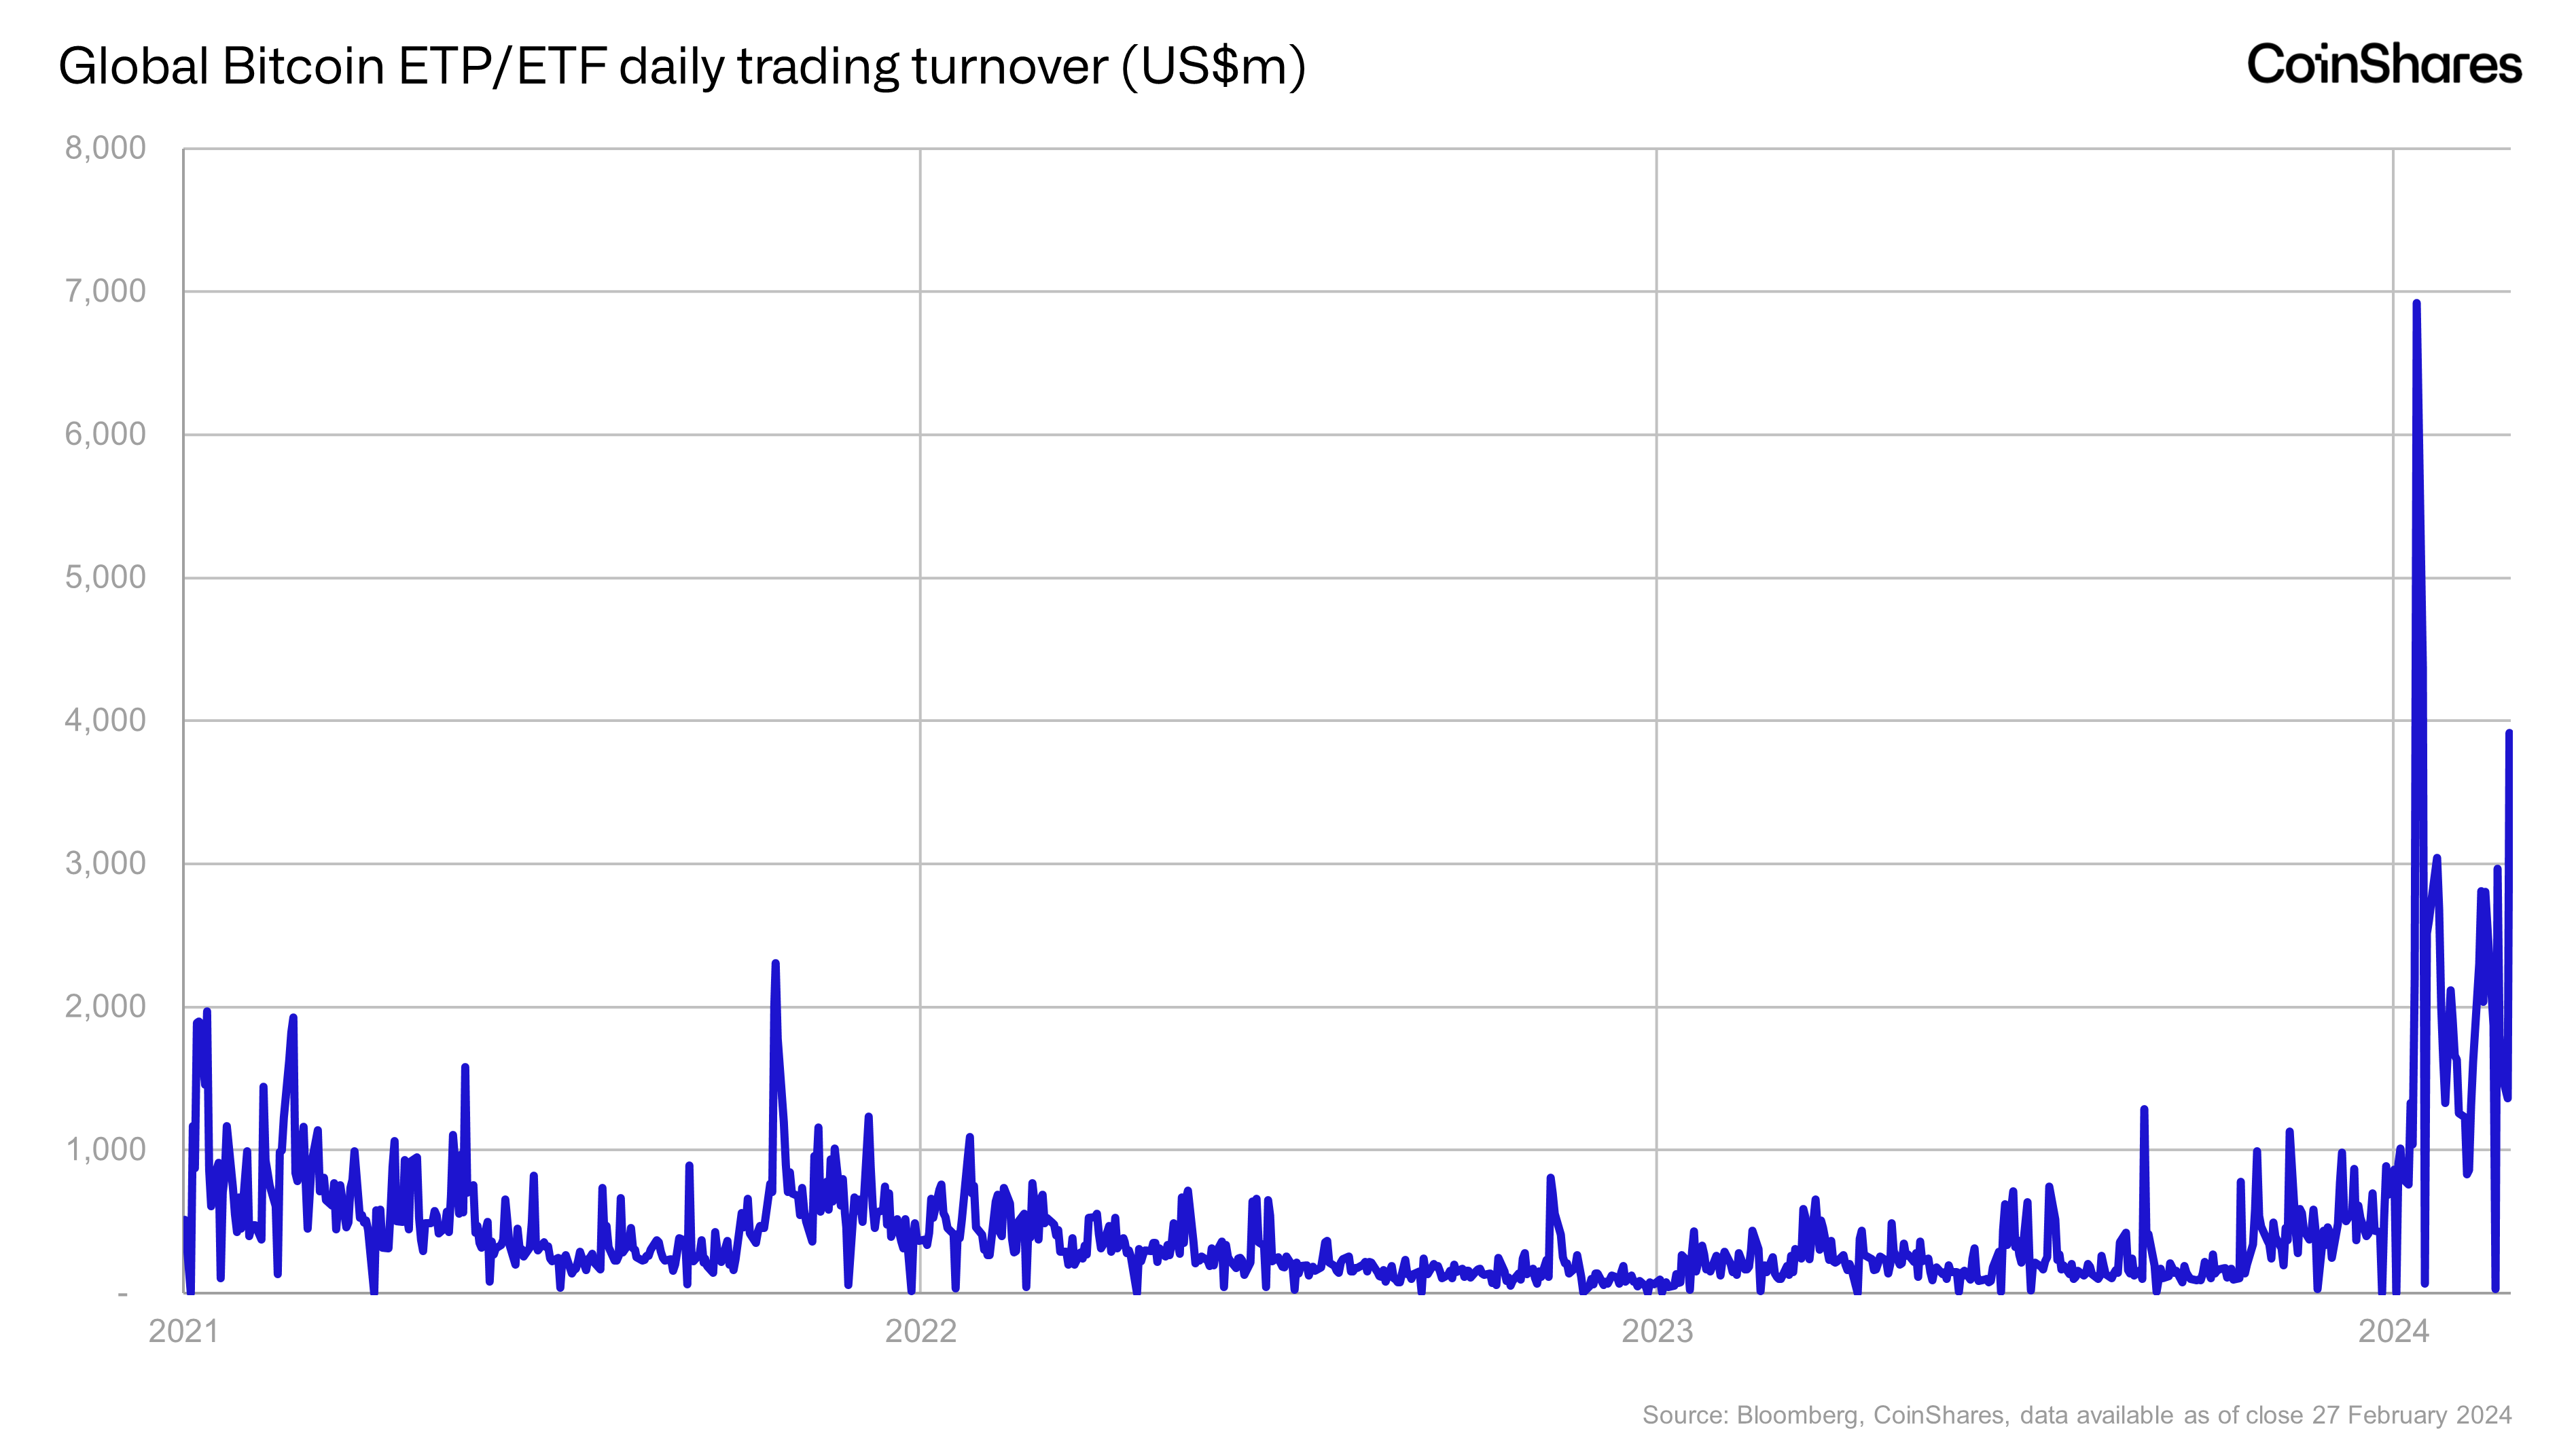 Global Bitcoin ETP/ETF Daily Trading Turnover